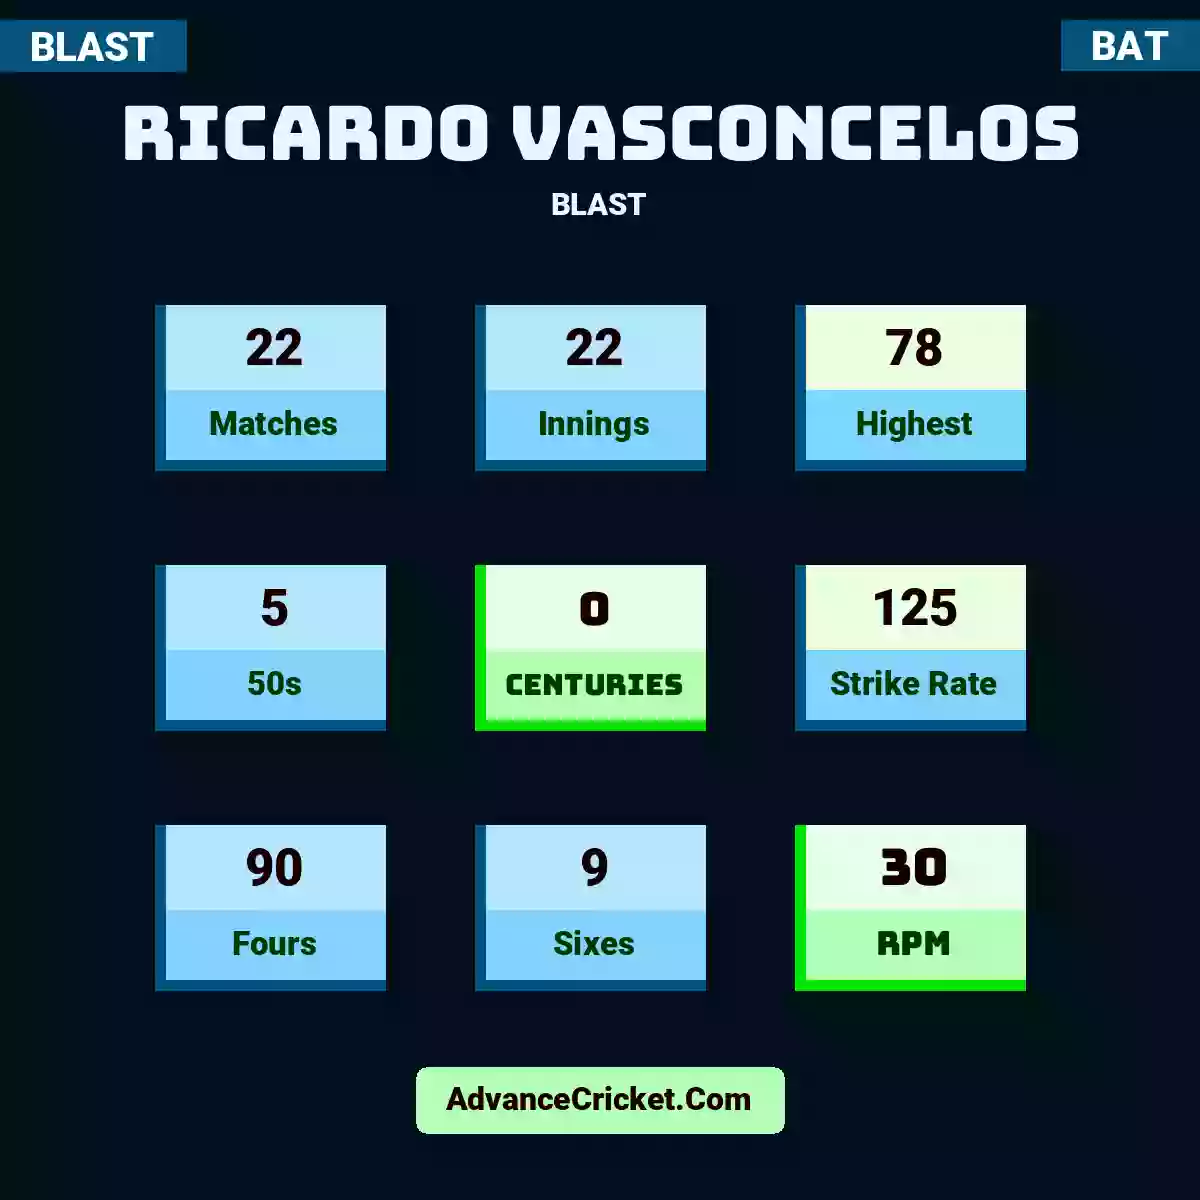 Ricardo Vasconcelos BLAST , Ricardo Vasconcelos played 22 matches, scored 78 runs as highest, 5 half-centuries, and 0 centuries, with a strike rate of 125. R.Vasconcelos hit 90 fours and 9 sixes, with an RPM of 30.